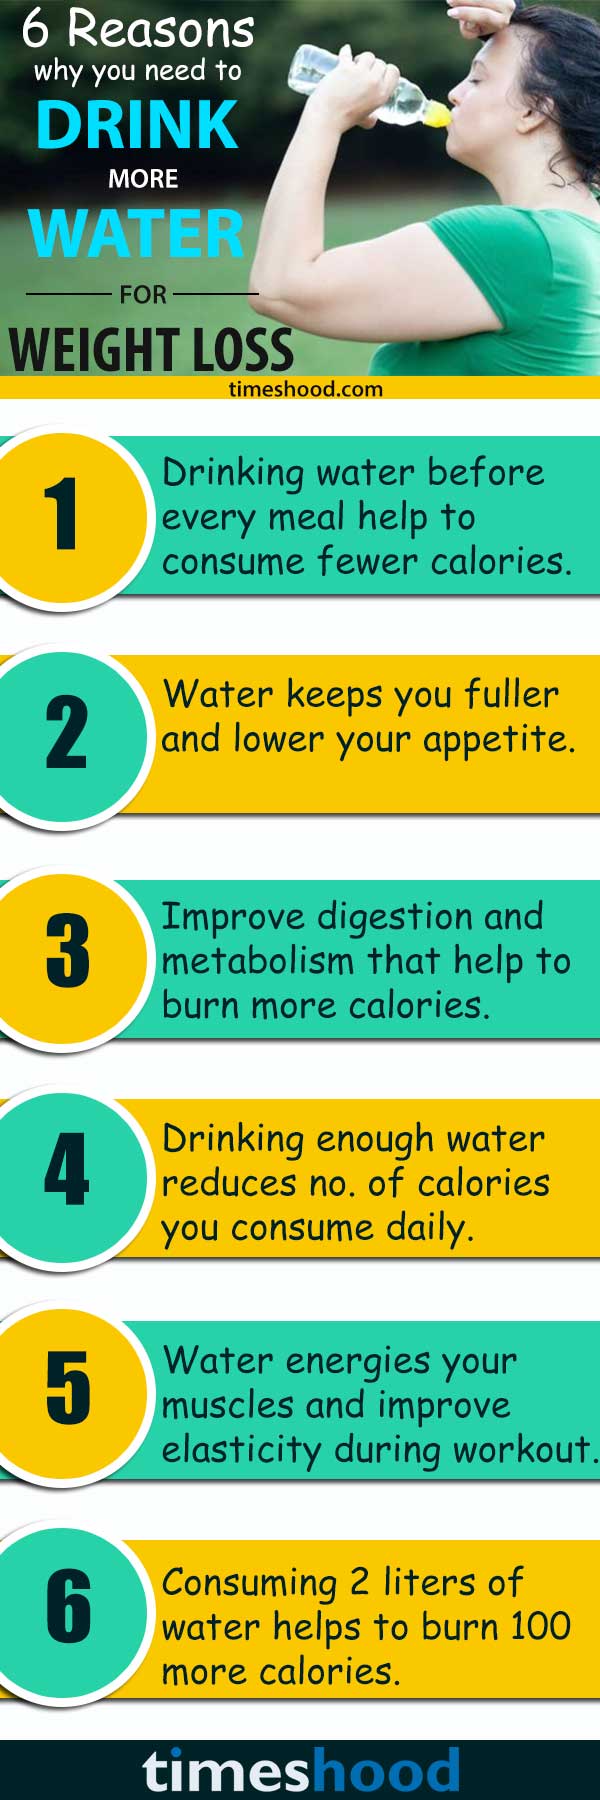 How to drink water for weight loss? Know how to lose 10 pounds in 10 days and best time to drink water for weight loss. Drink to lose weight. Weight loss tips. Weight loss diet. Why to drink water for weight loss